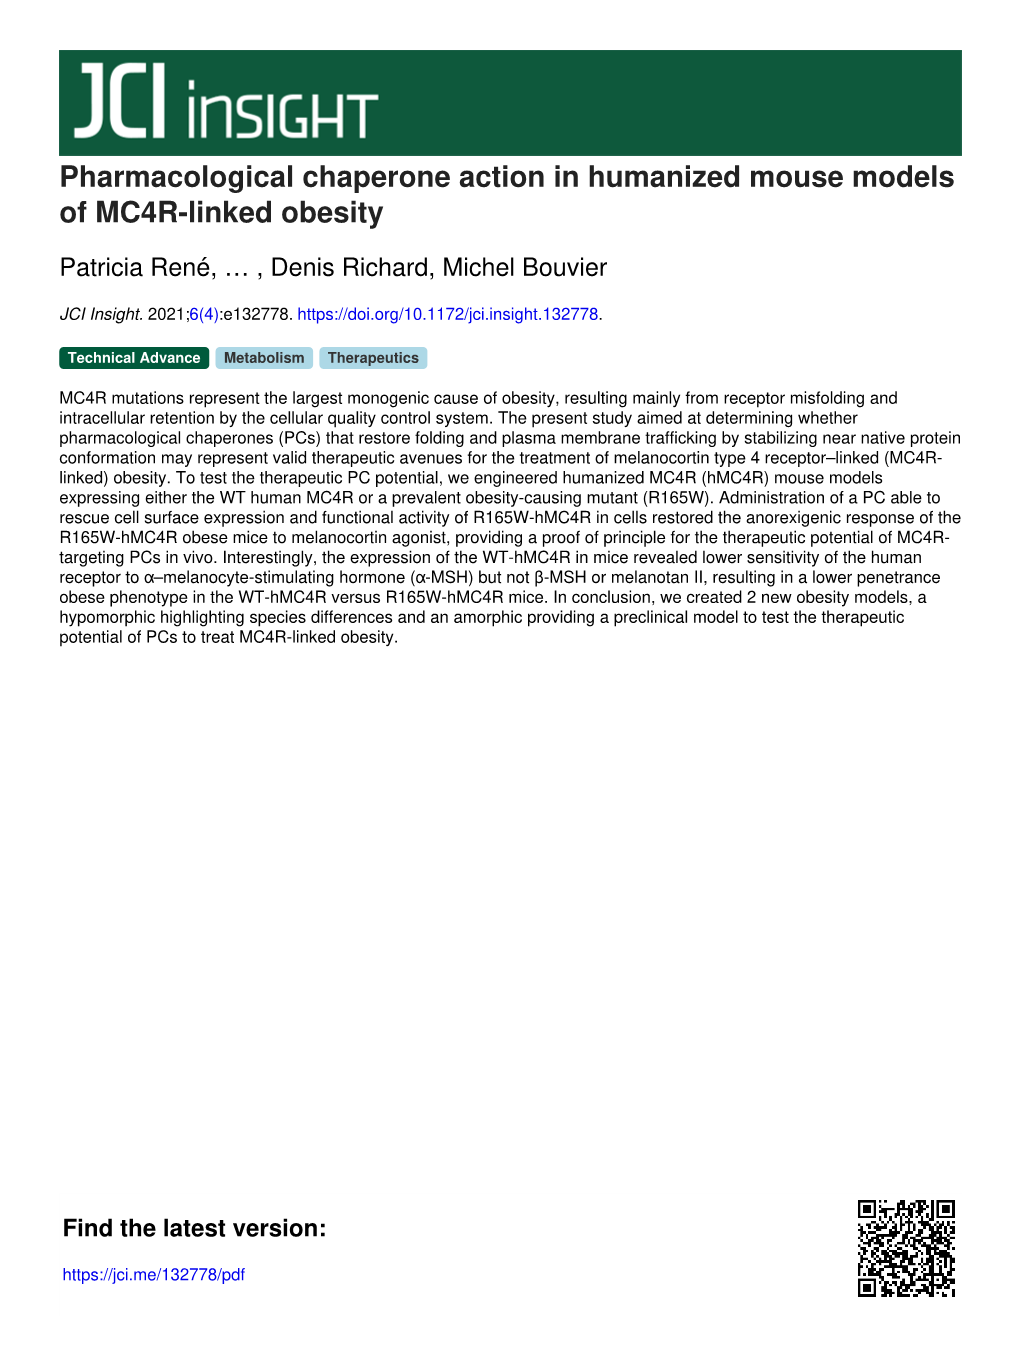 Pharmacological Chaperone Action in Humanized Mouse Models of MC4R-Linked Obesity